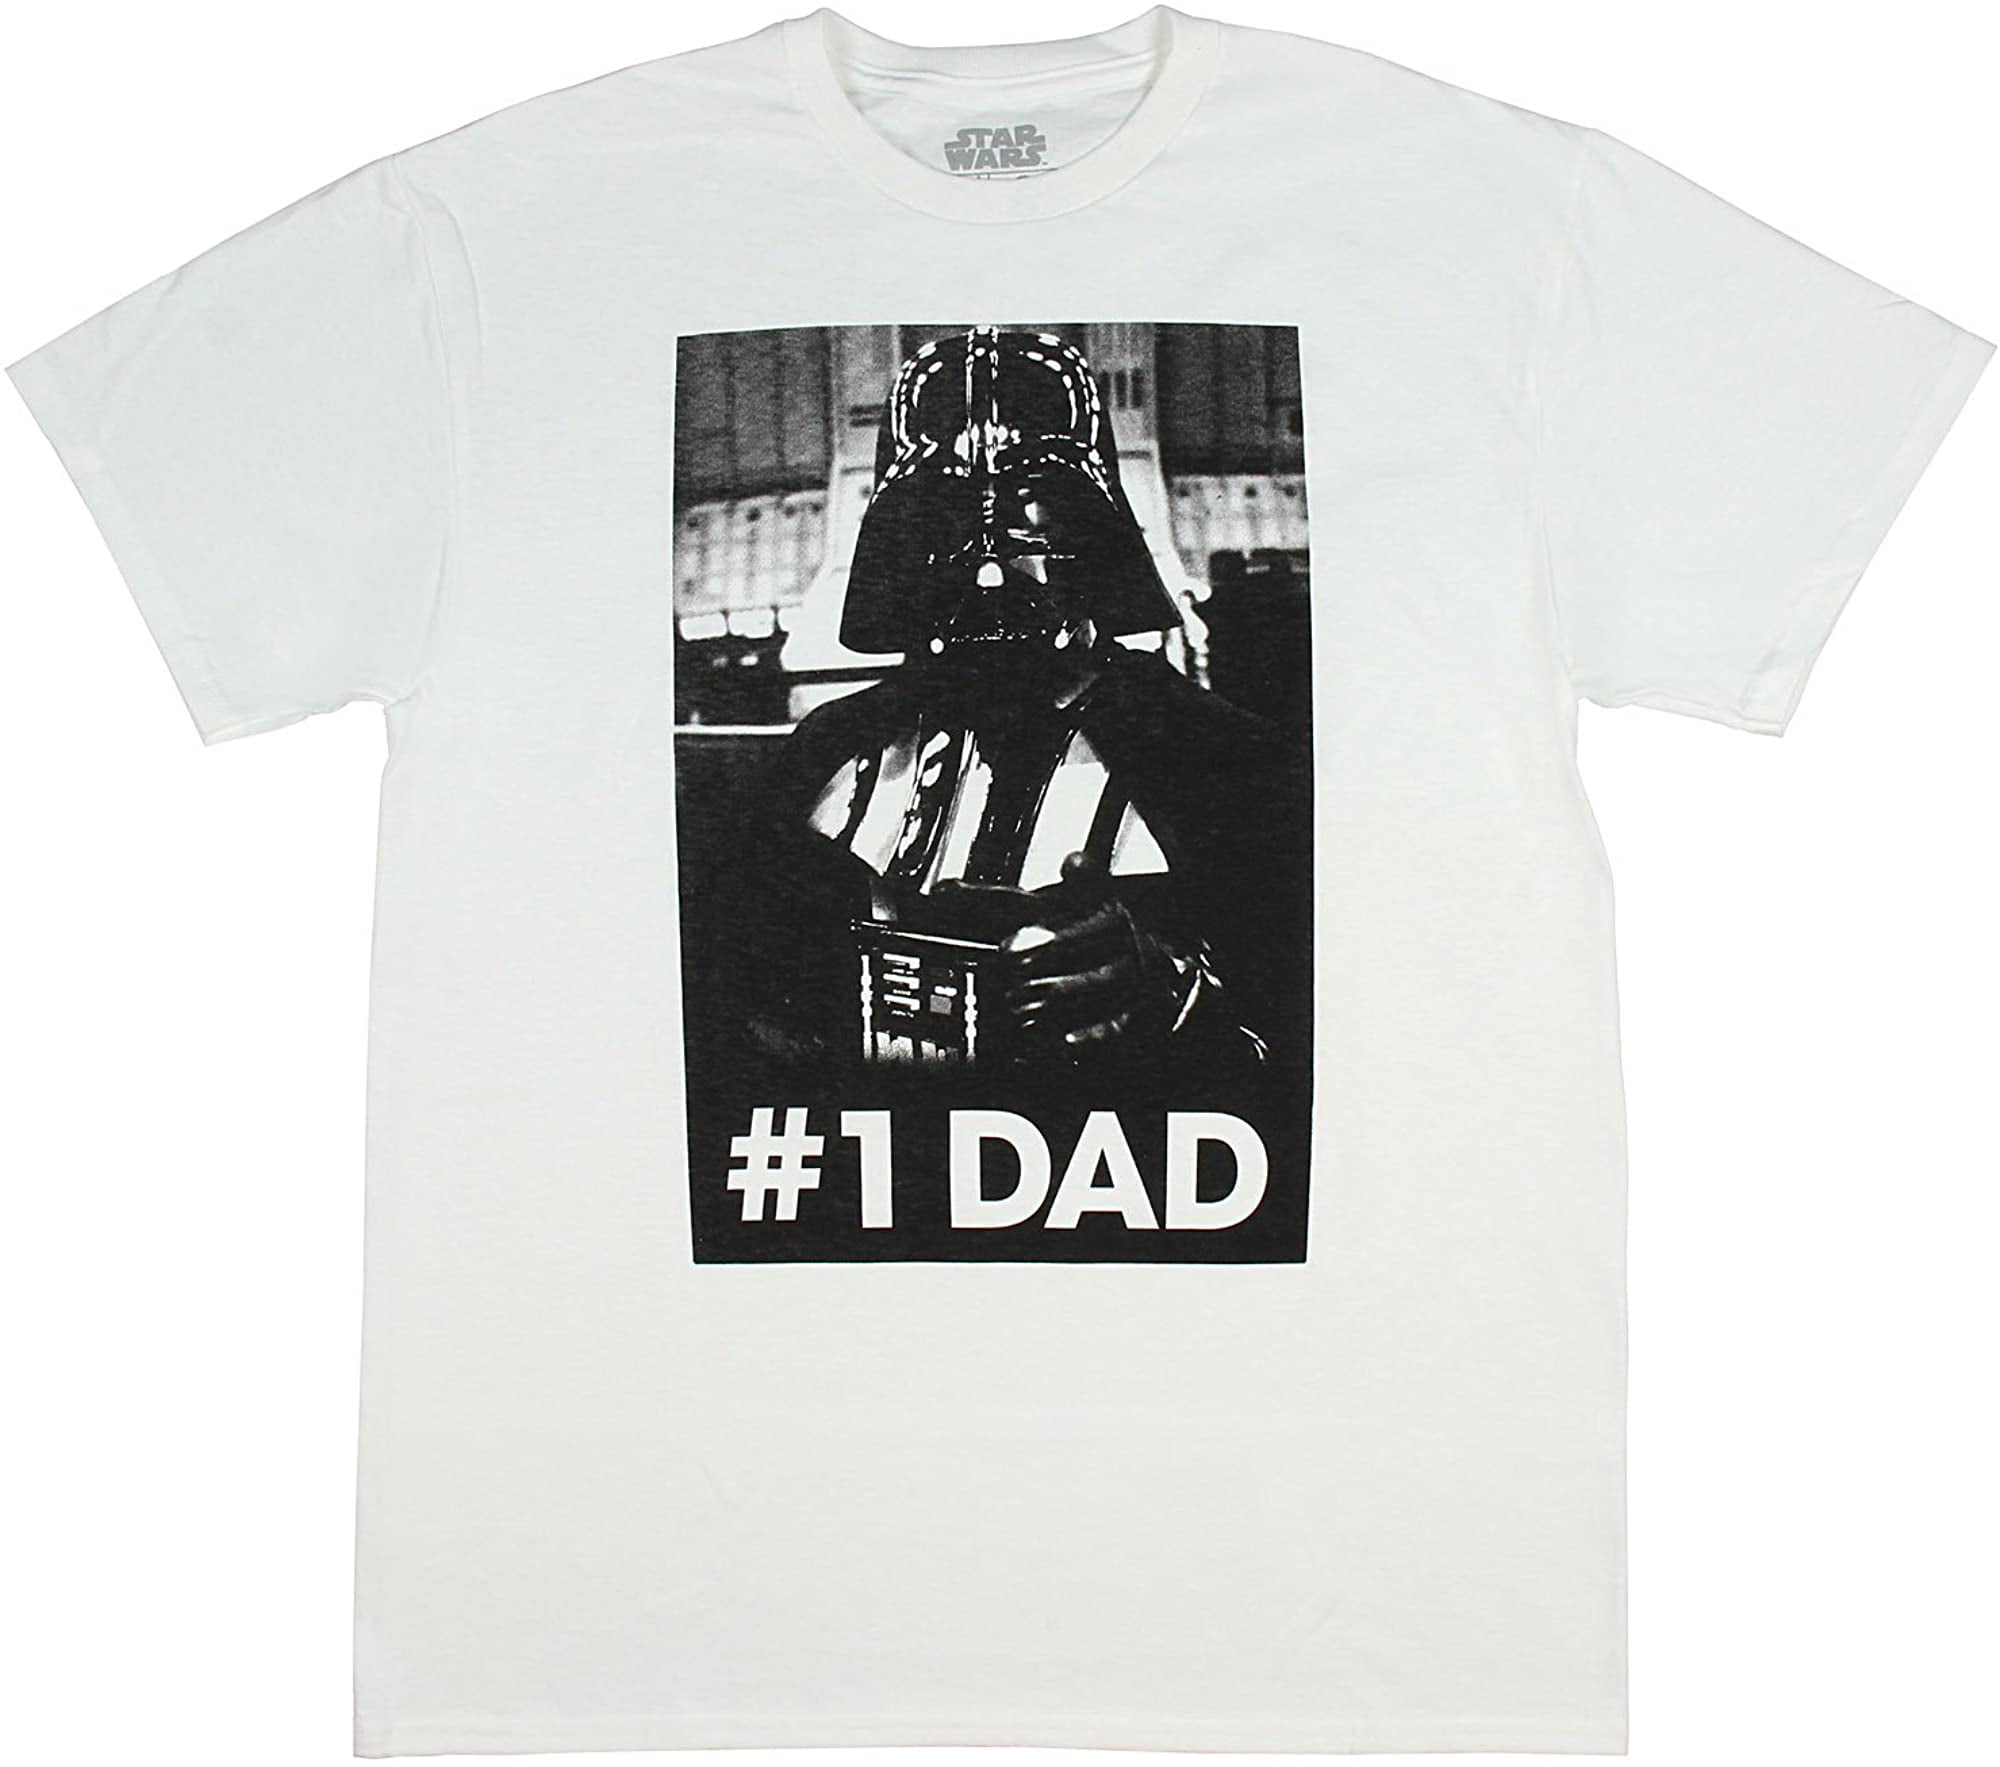 STAR WARS Mens Officially Licensed Tees for Dad 